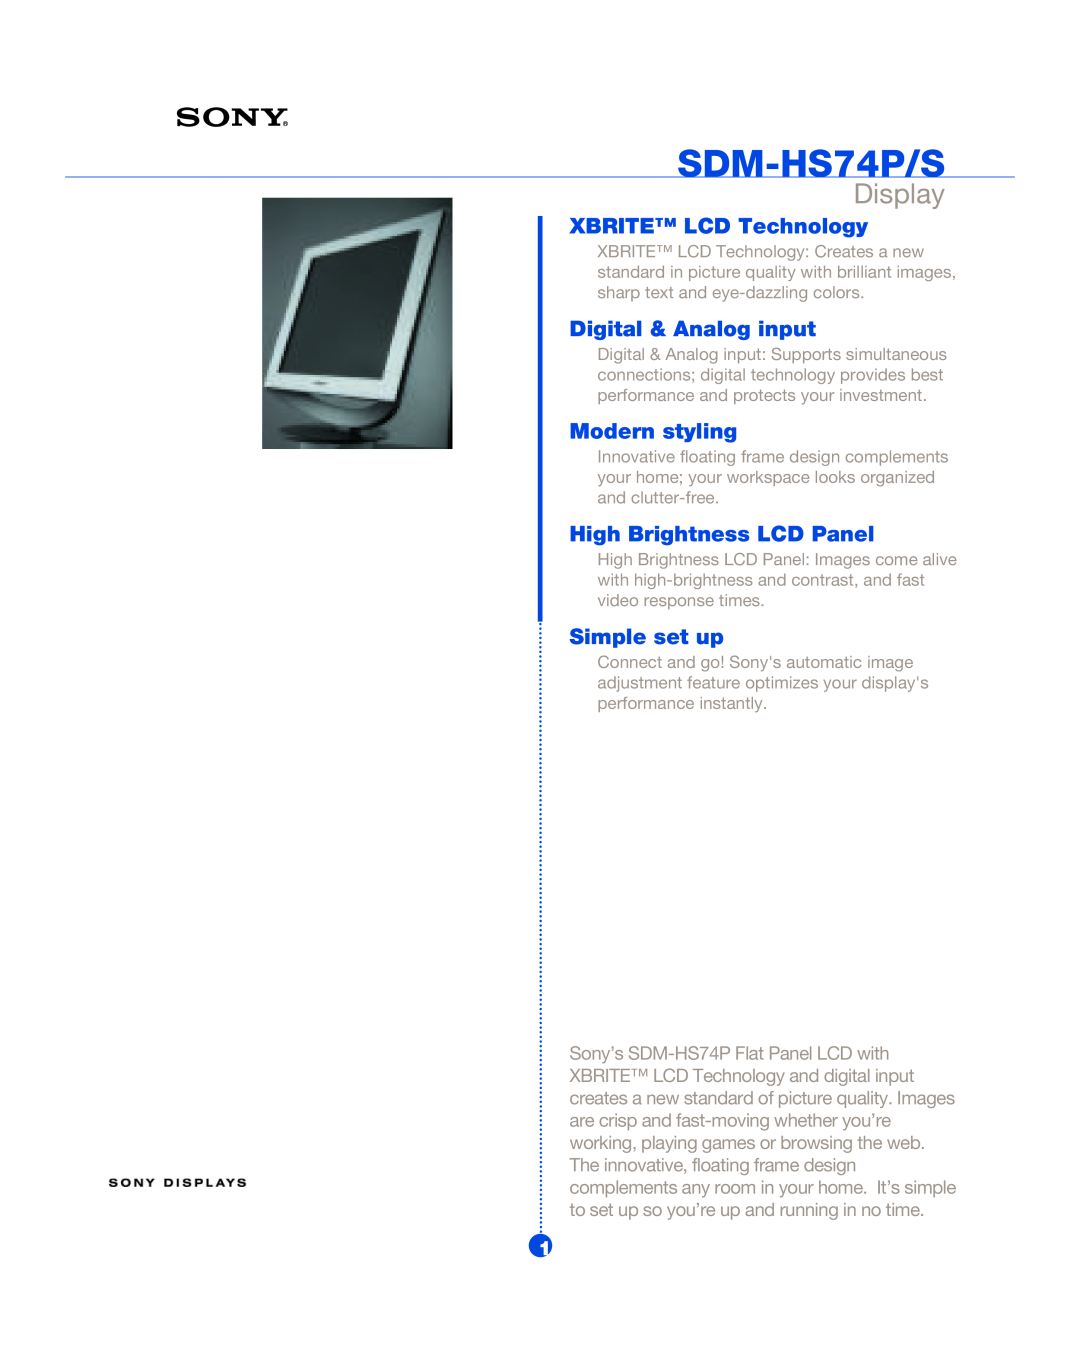 Sony manual SDM-HS74P/S, Display, XBRITE LCD Technology, Digital & Analog input, Modern styling, Simple set up 